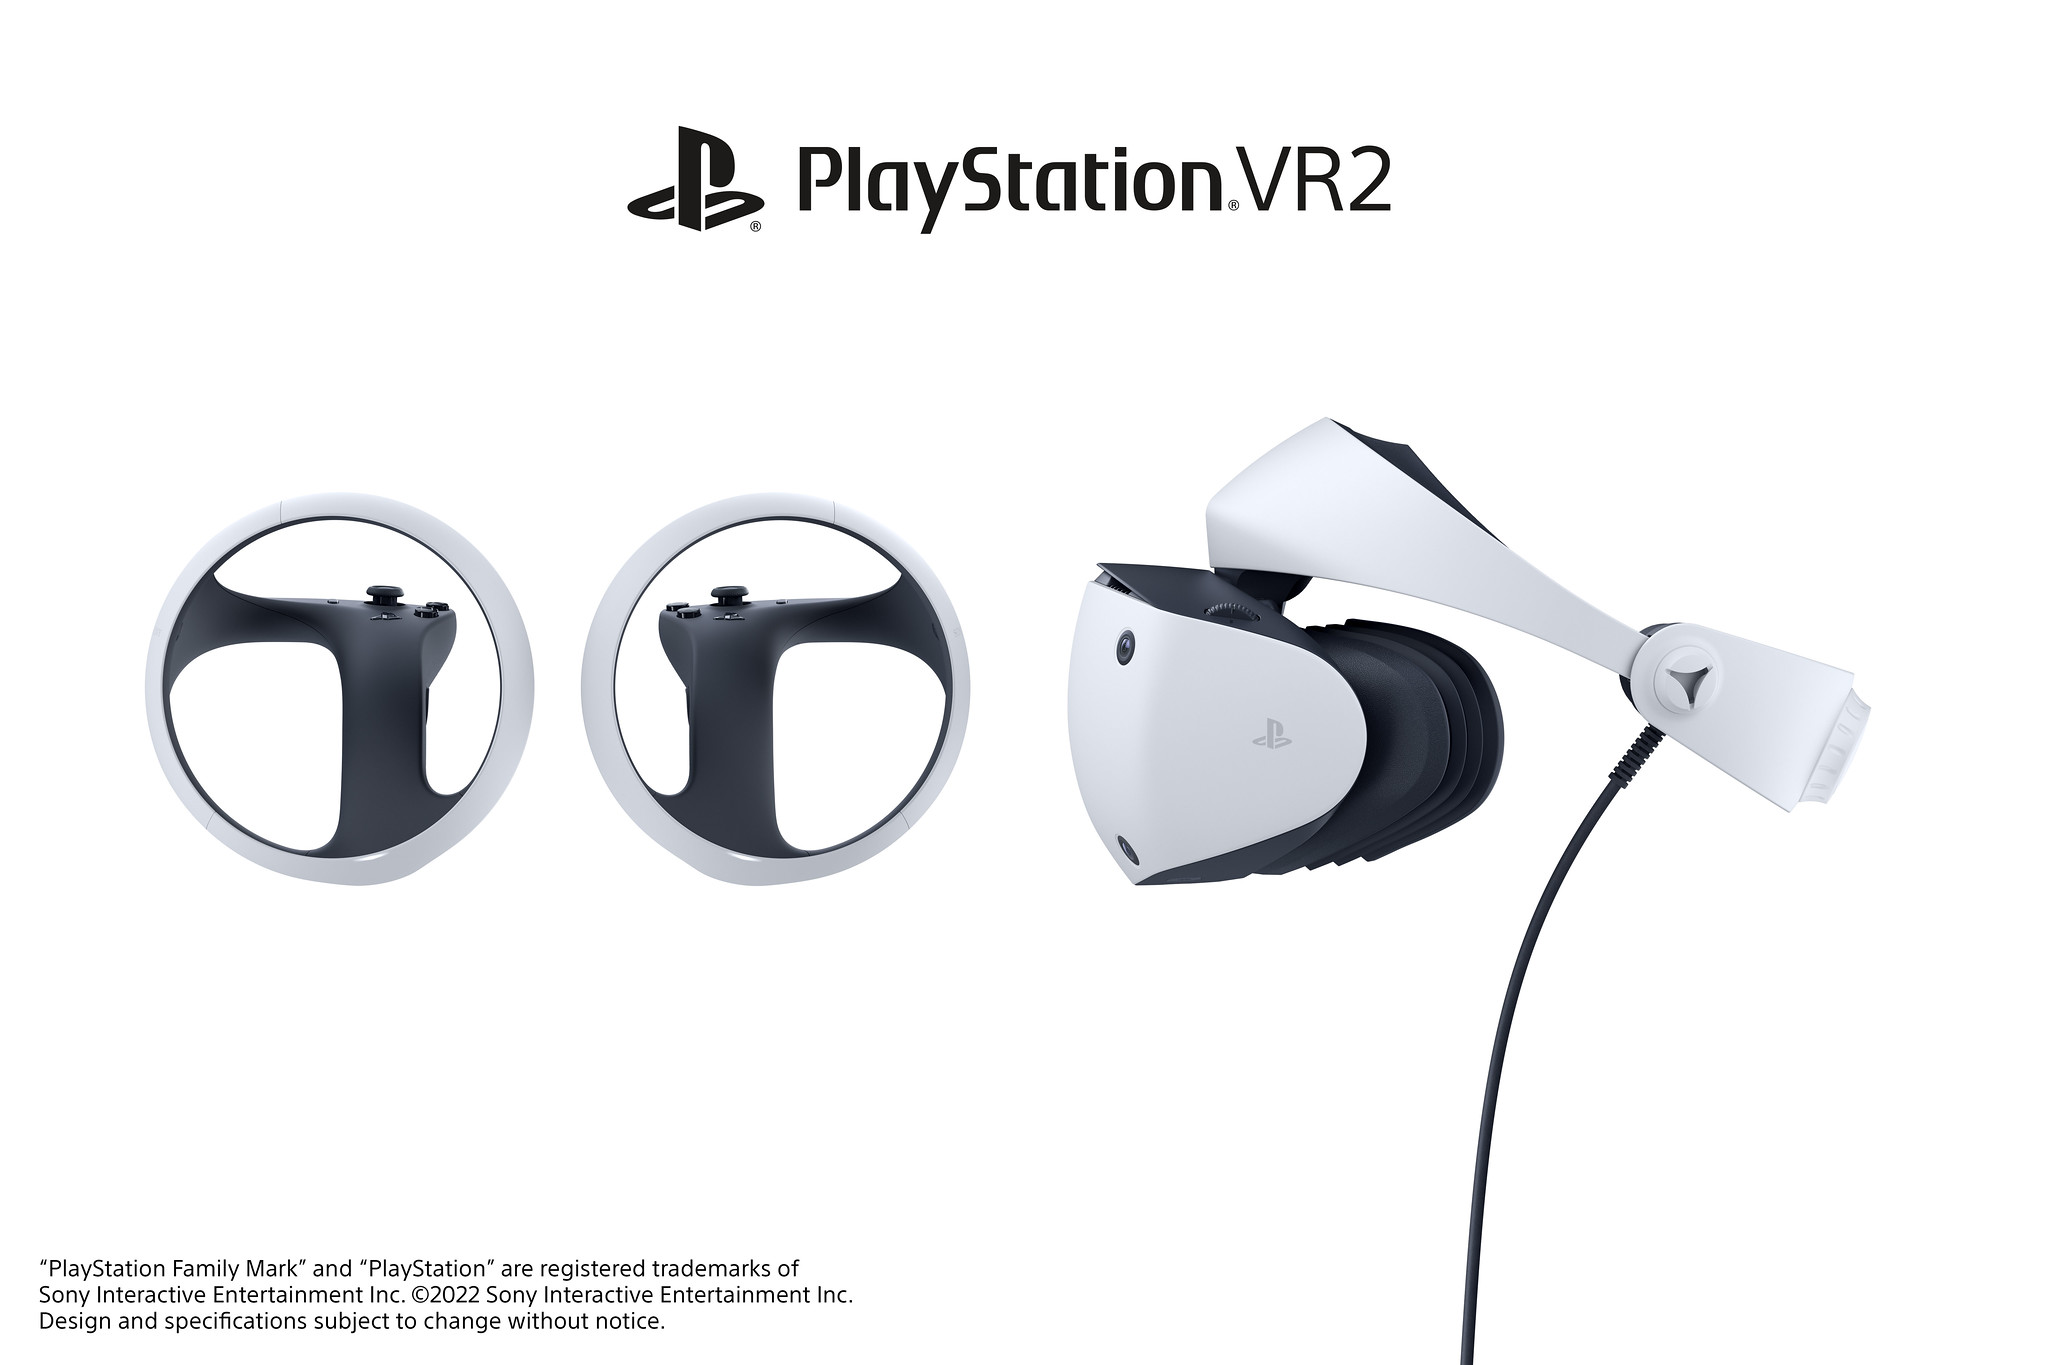 A side profile view of the PSVR 2 headset and controllers